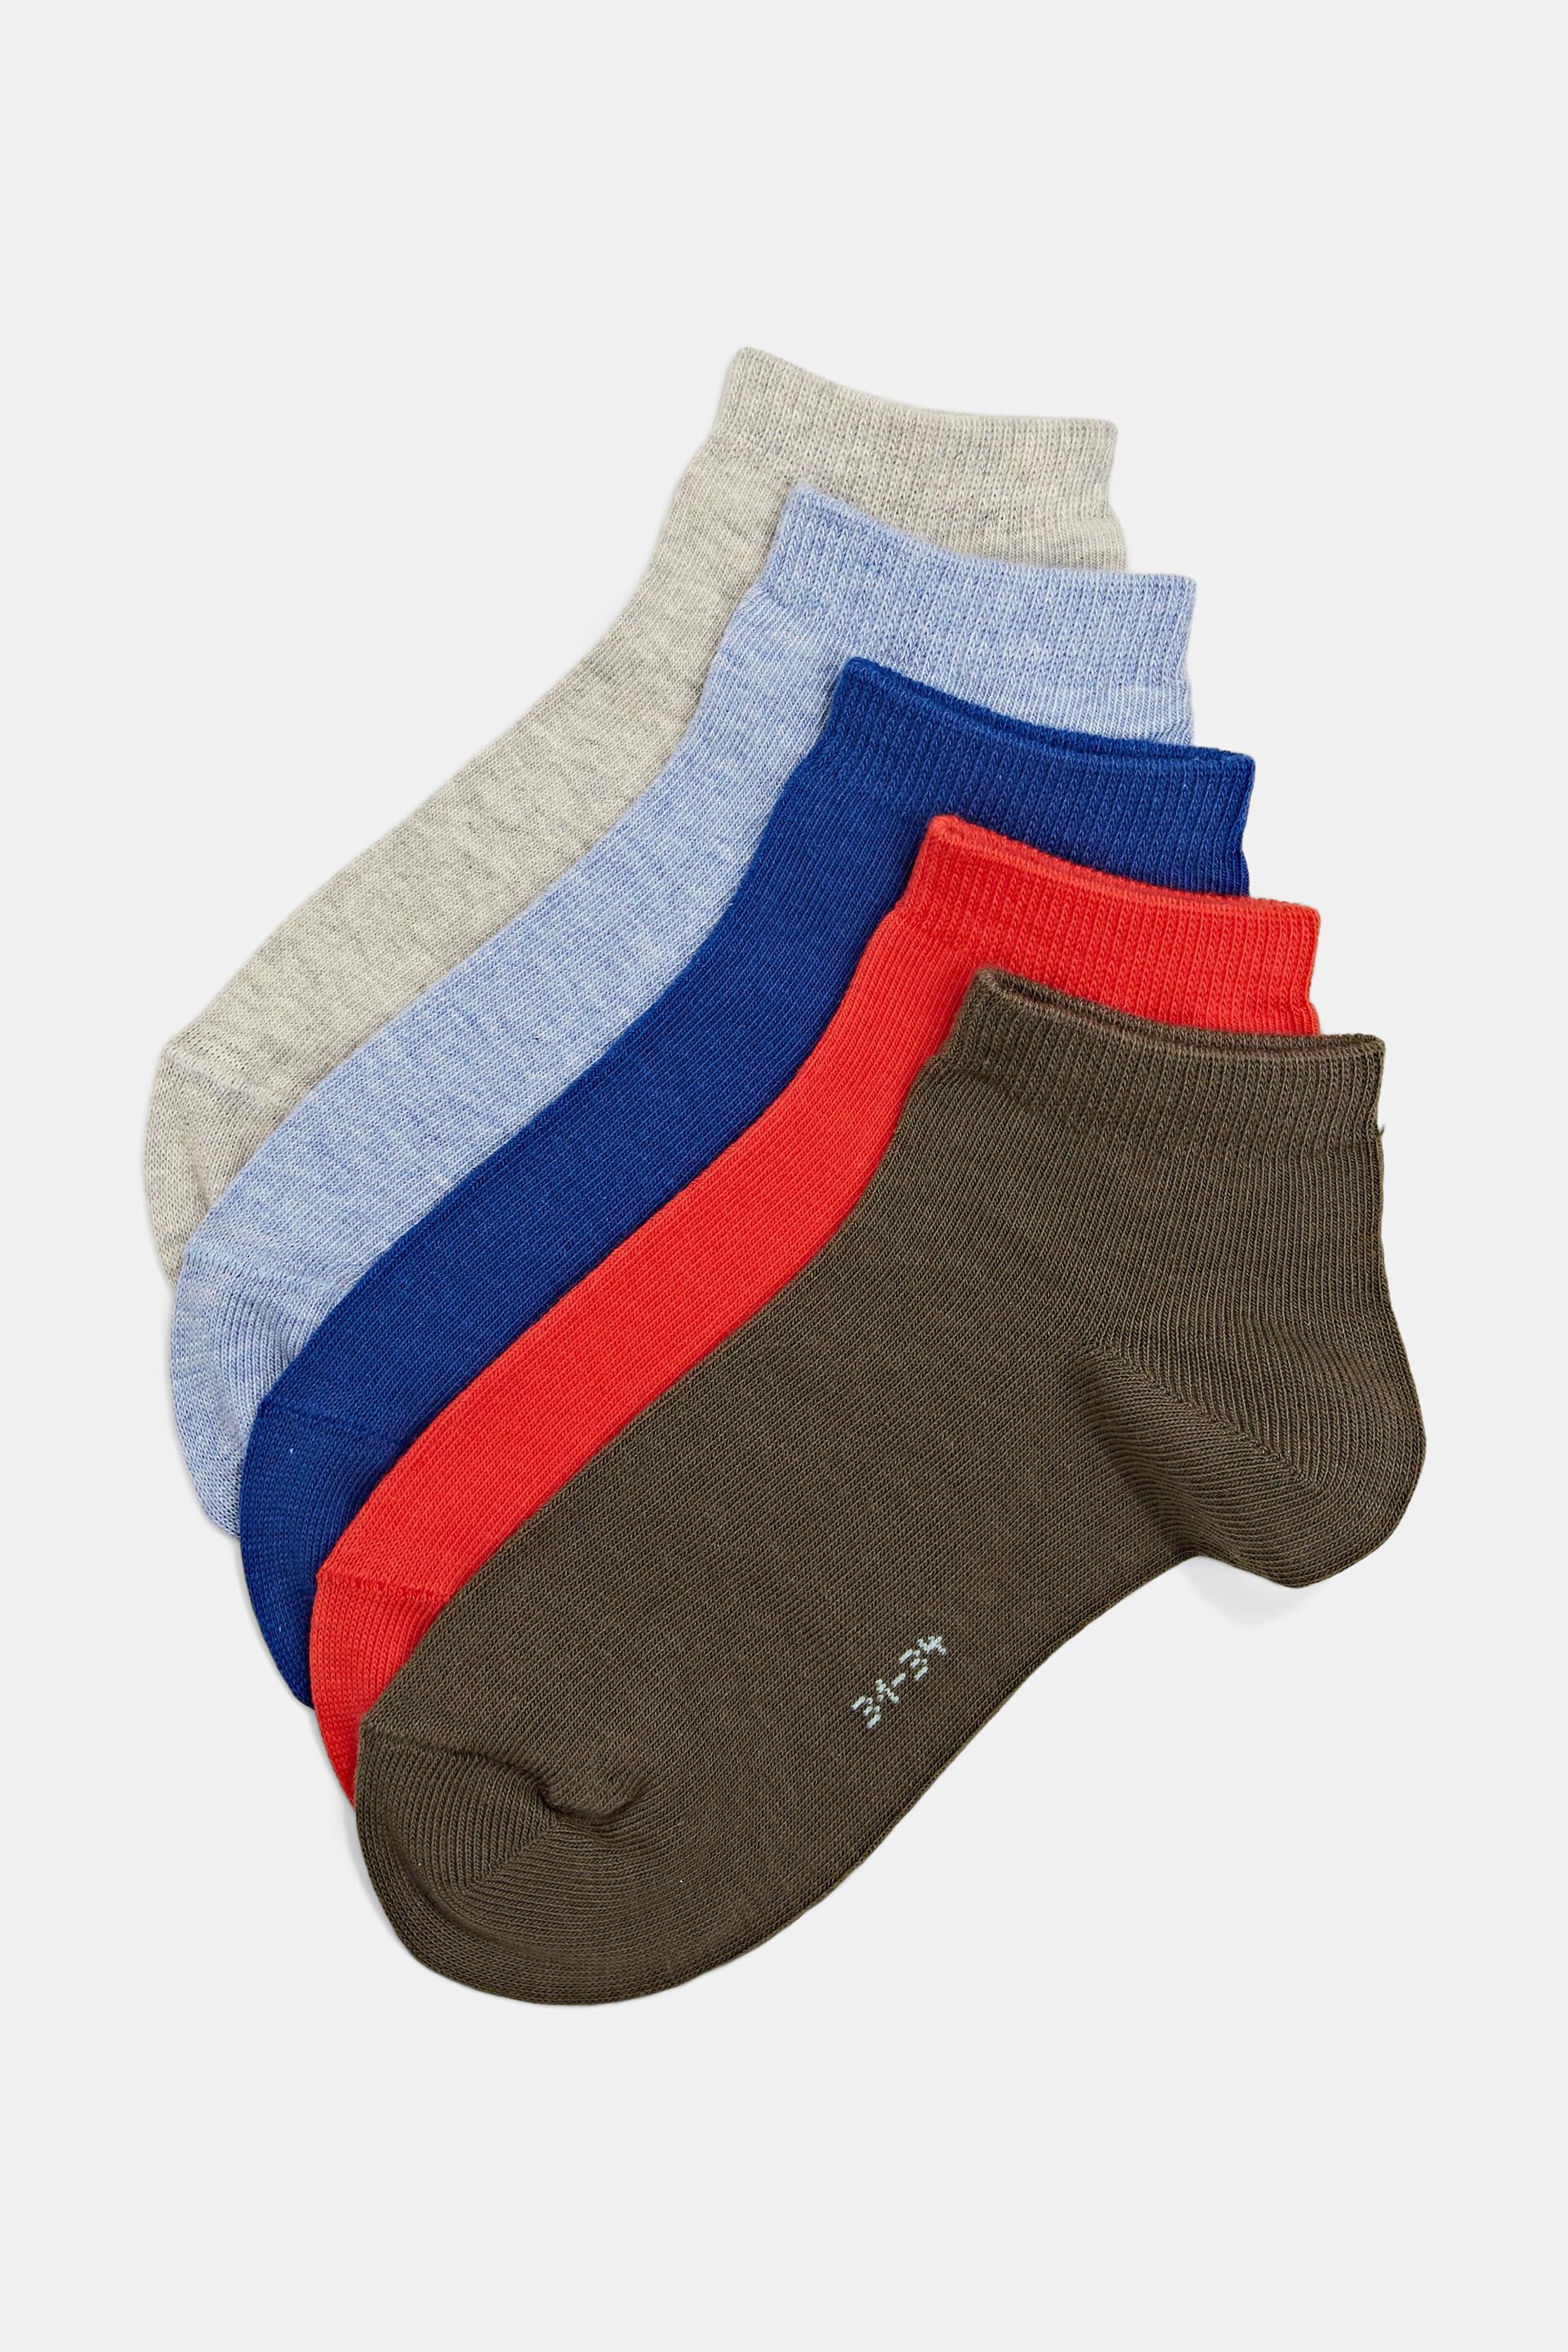 Esprit pairs cotton an Pack in of plain-coloured socks, organic 5 blend